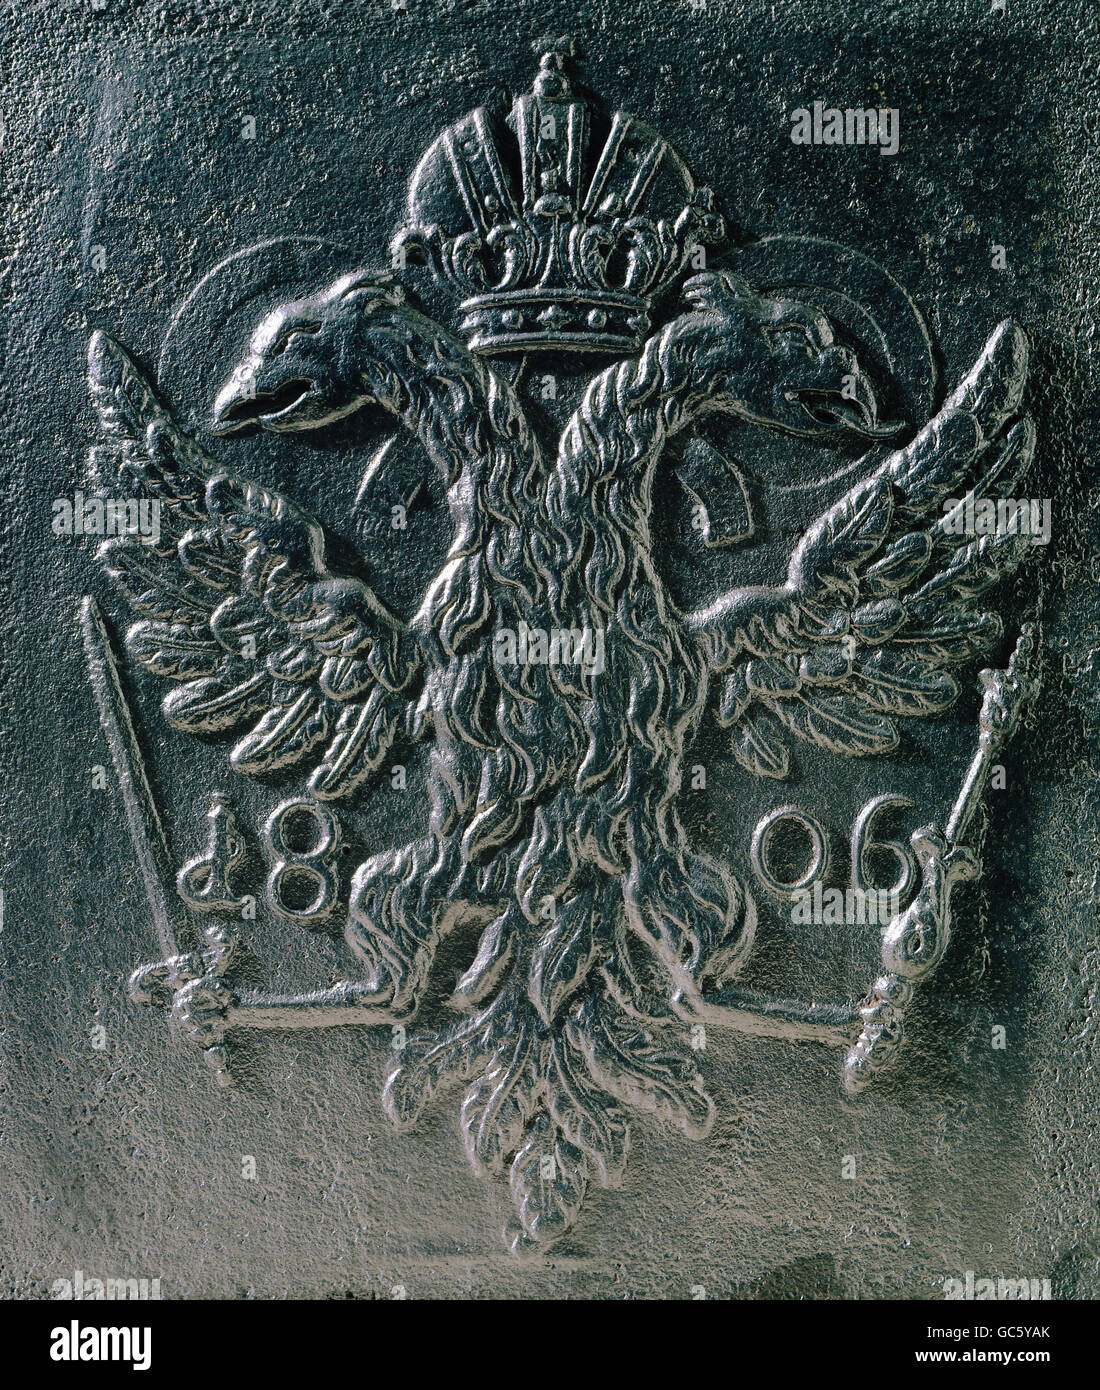 heraldry, coat of arms, Germany, Holy Roman Empire of the German Empire, imperial eagle, relief, cast iron, oven plate, ironworks of the former Archbishop, Obereichstaett, 1806, Additional-Rights-Clearences-Not Available Stock Photo